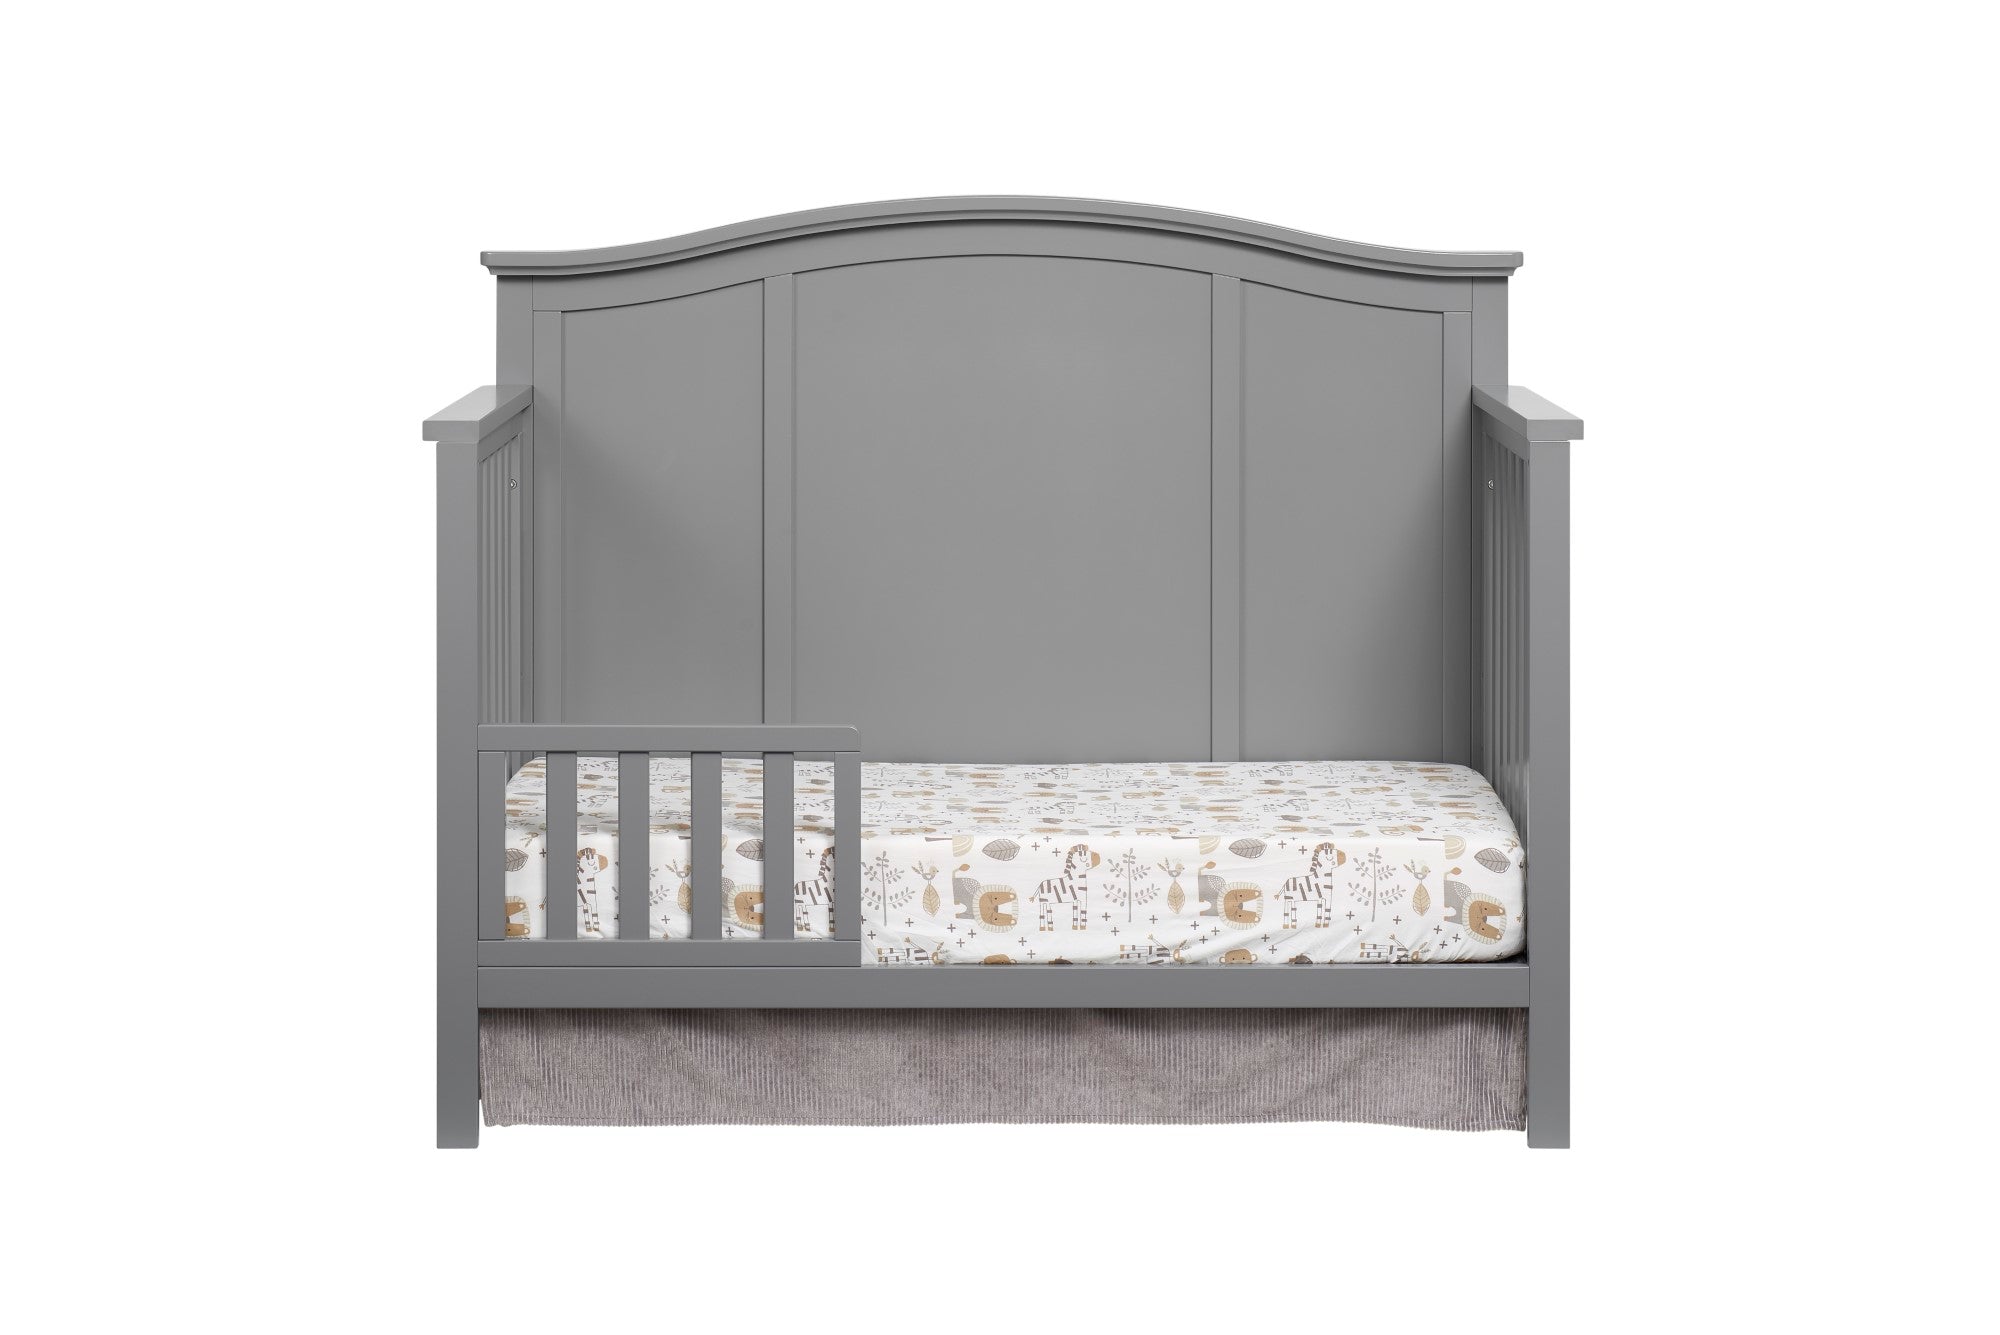 Oxford Baby Emerson 4 in 1 Convertible Crib